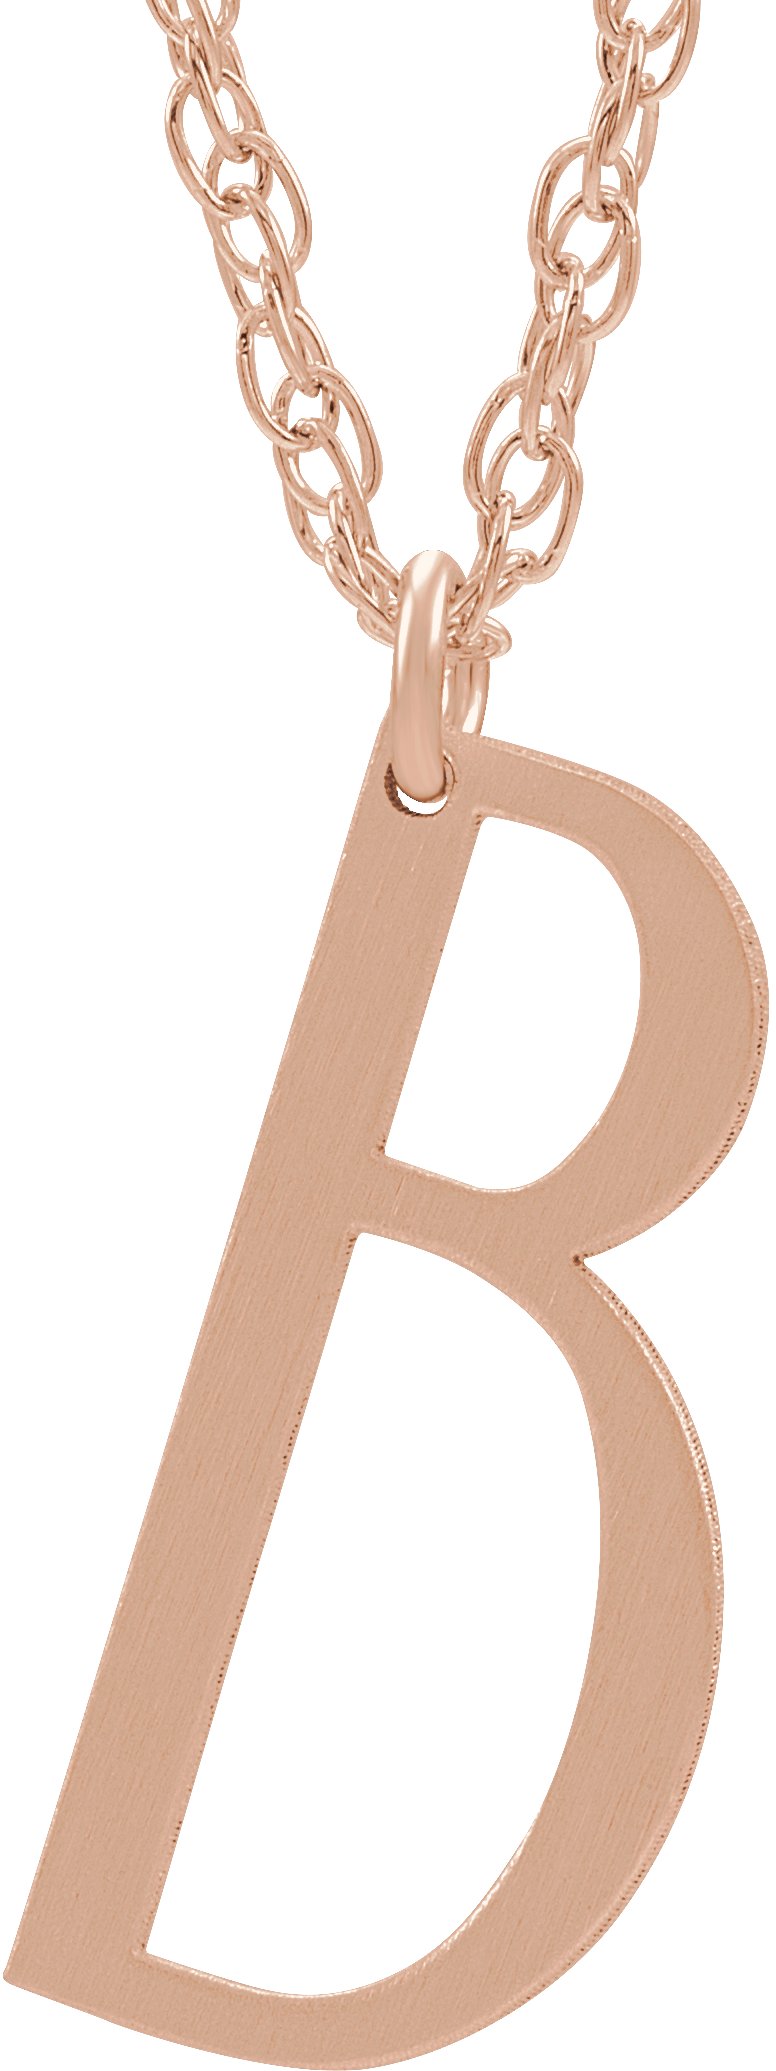 14K Rose Gold-Plated Sterling Silver Block Initial B 16-18" Necklace with Brush Finish